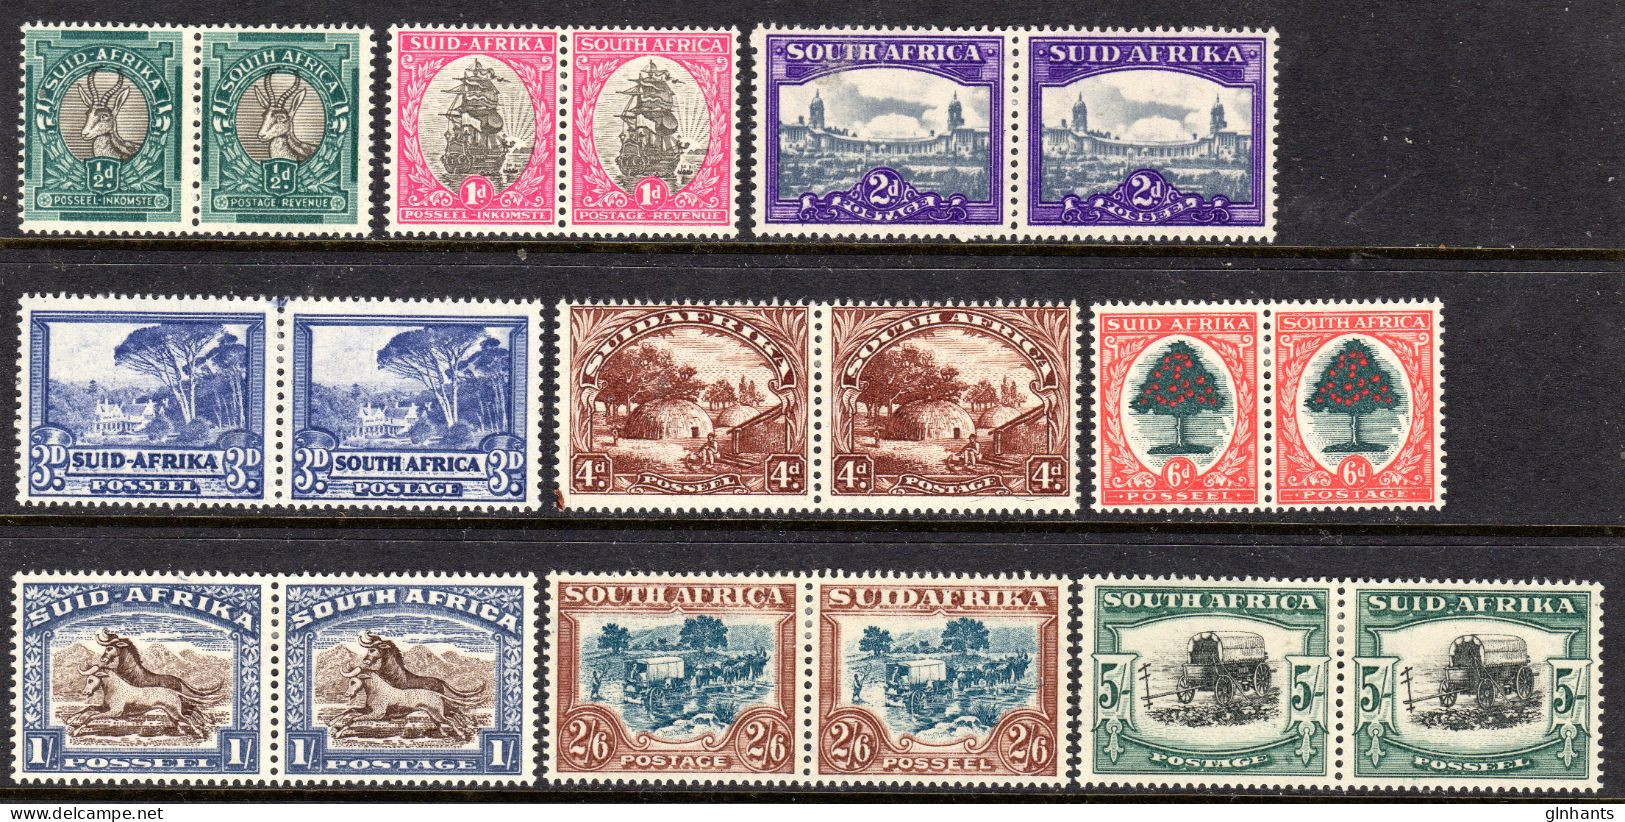 SOUTH AFRICA - 1947 DEFINITIVE SET IN PAIRS (18V) FINE LIGHTLY MOUNTED MINT LMM * SG 114-122 (2 SCANS) - Unused Stamps